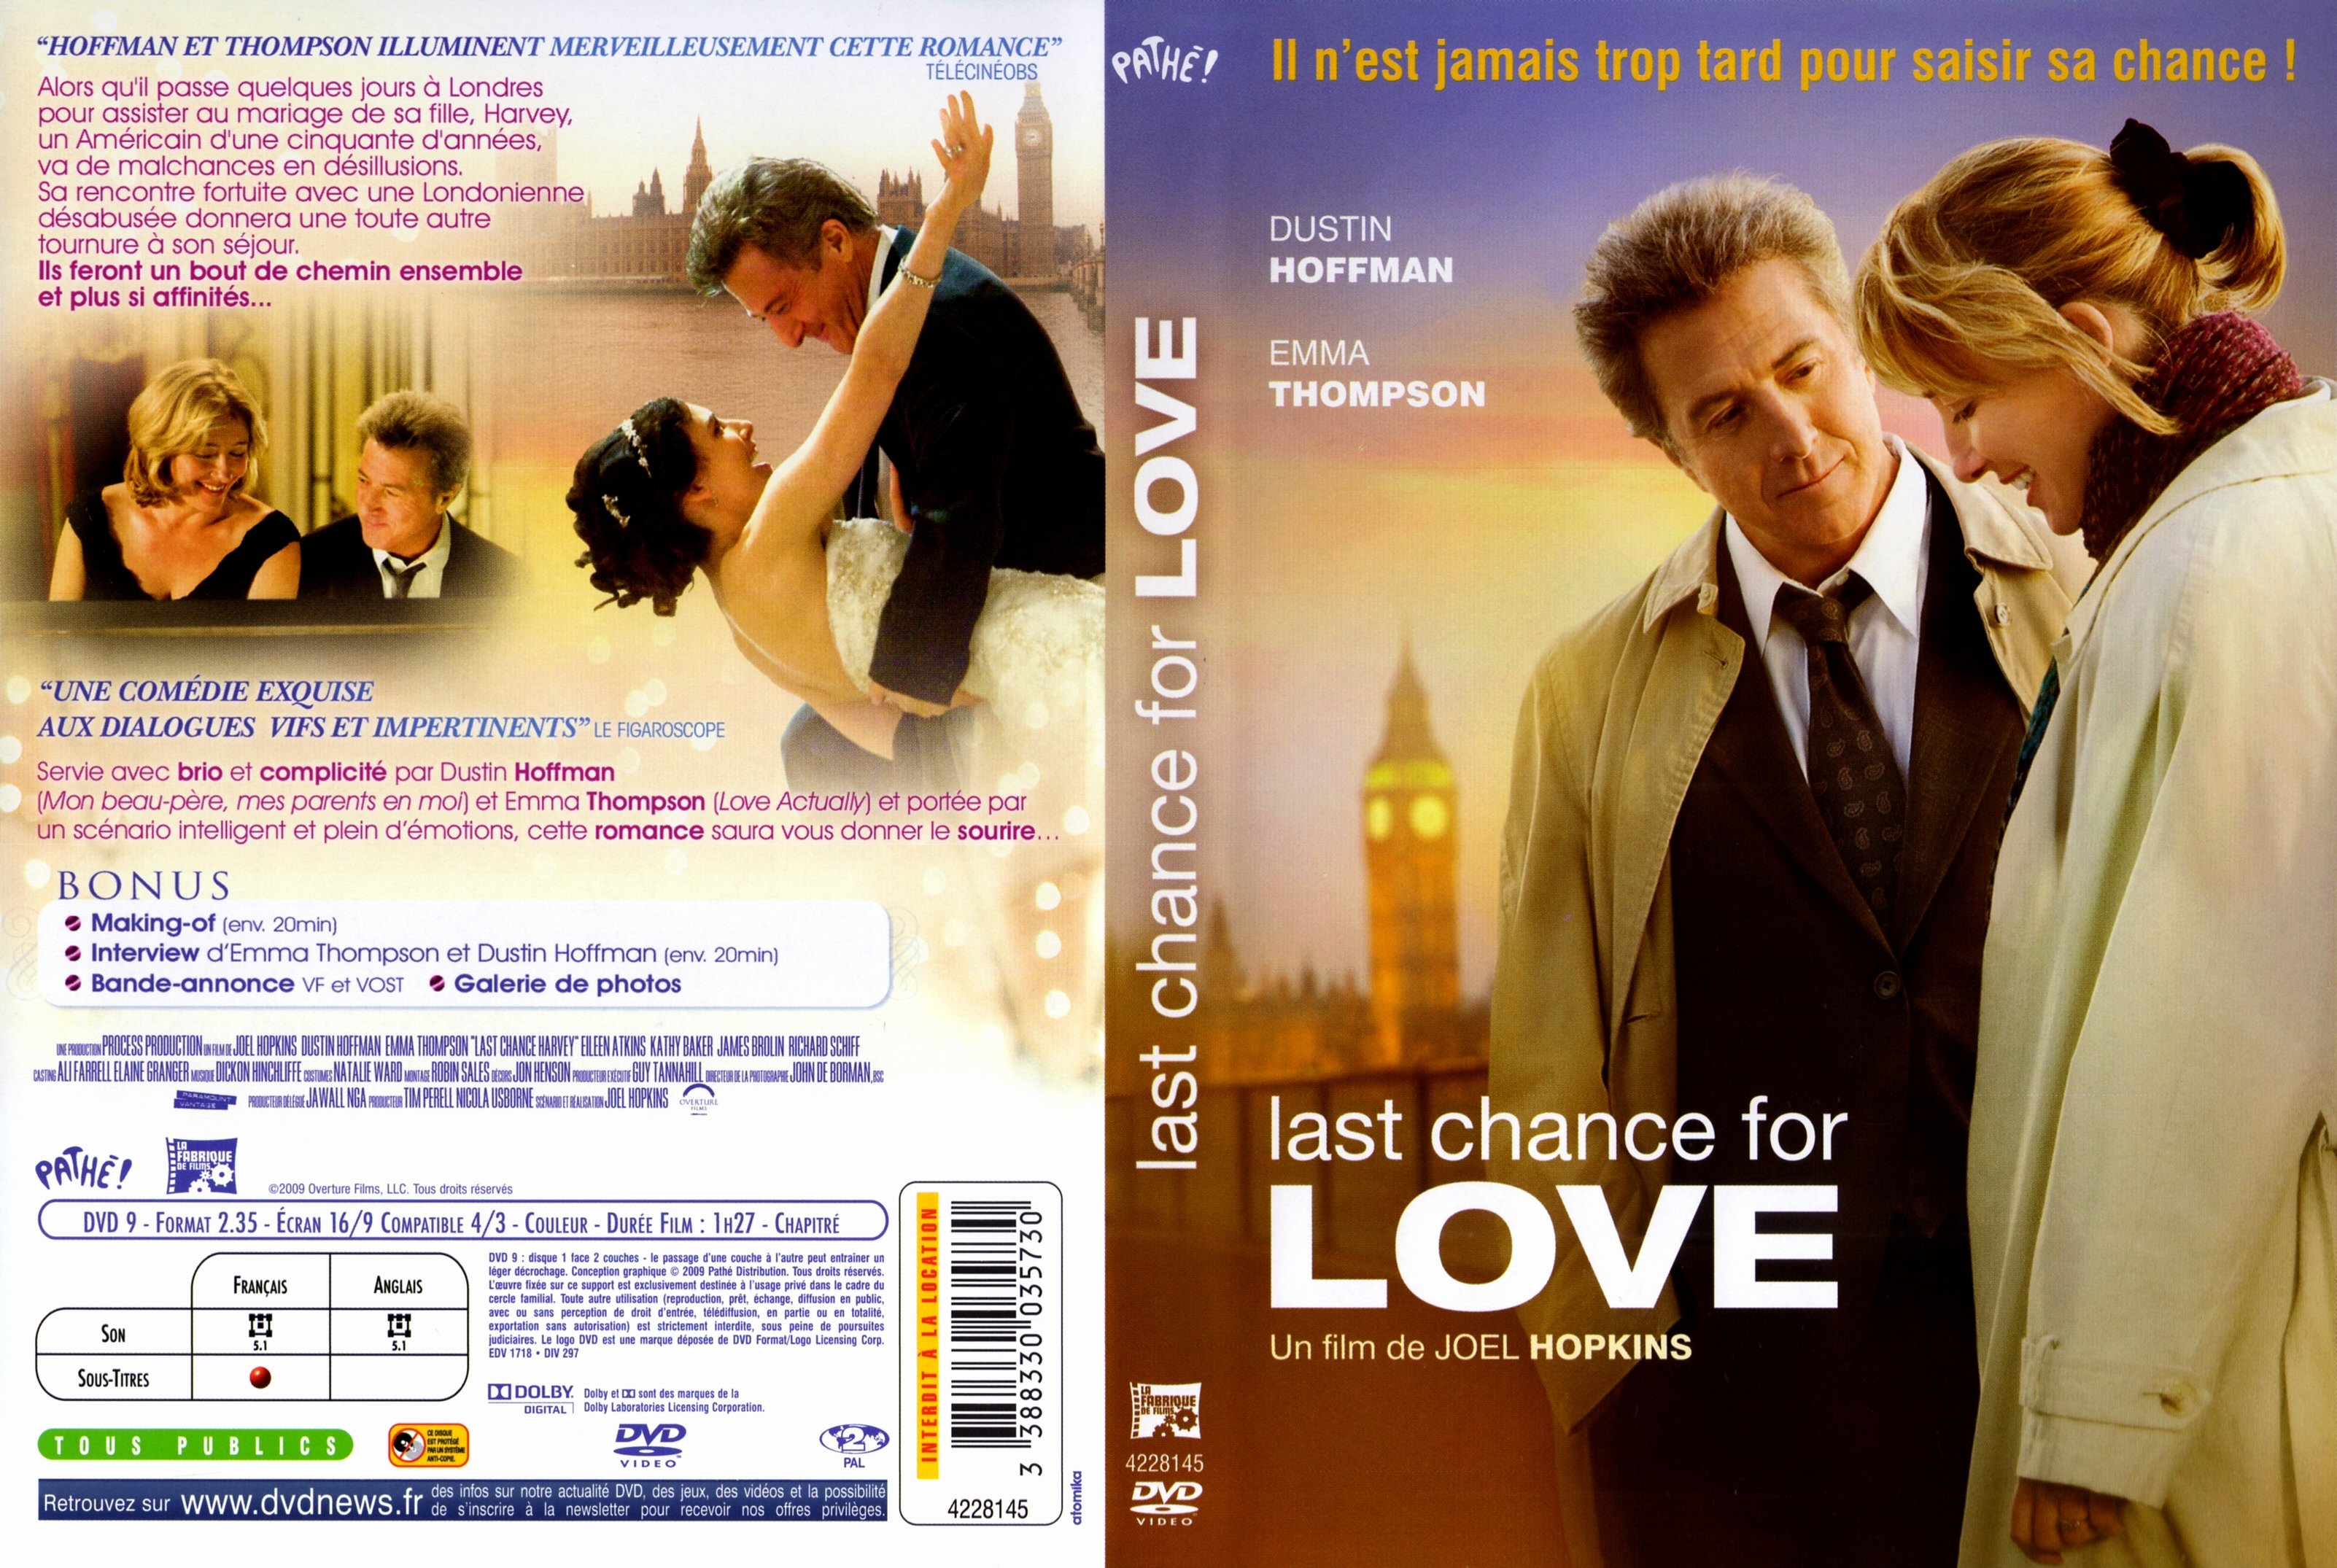 Jaquette DVD Last chance for love